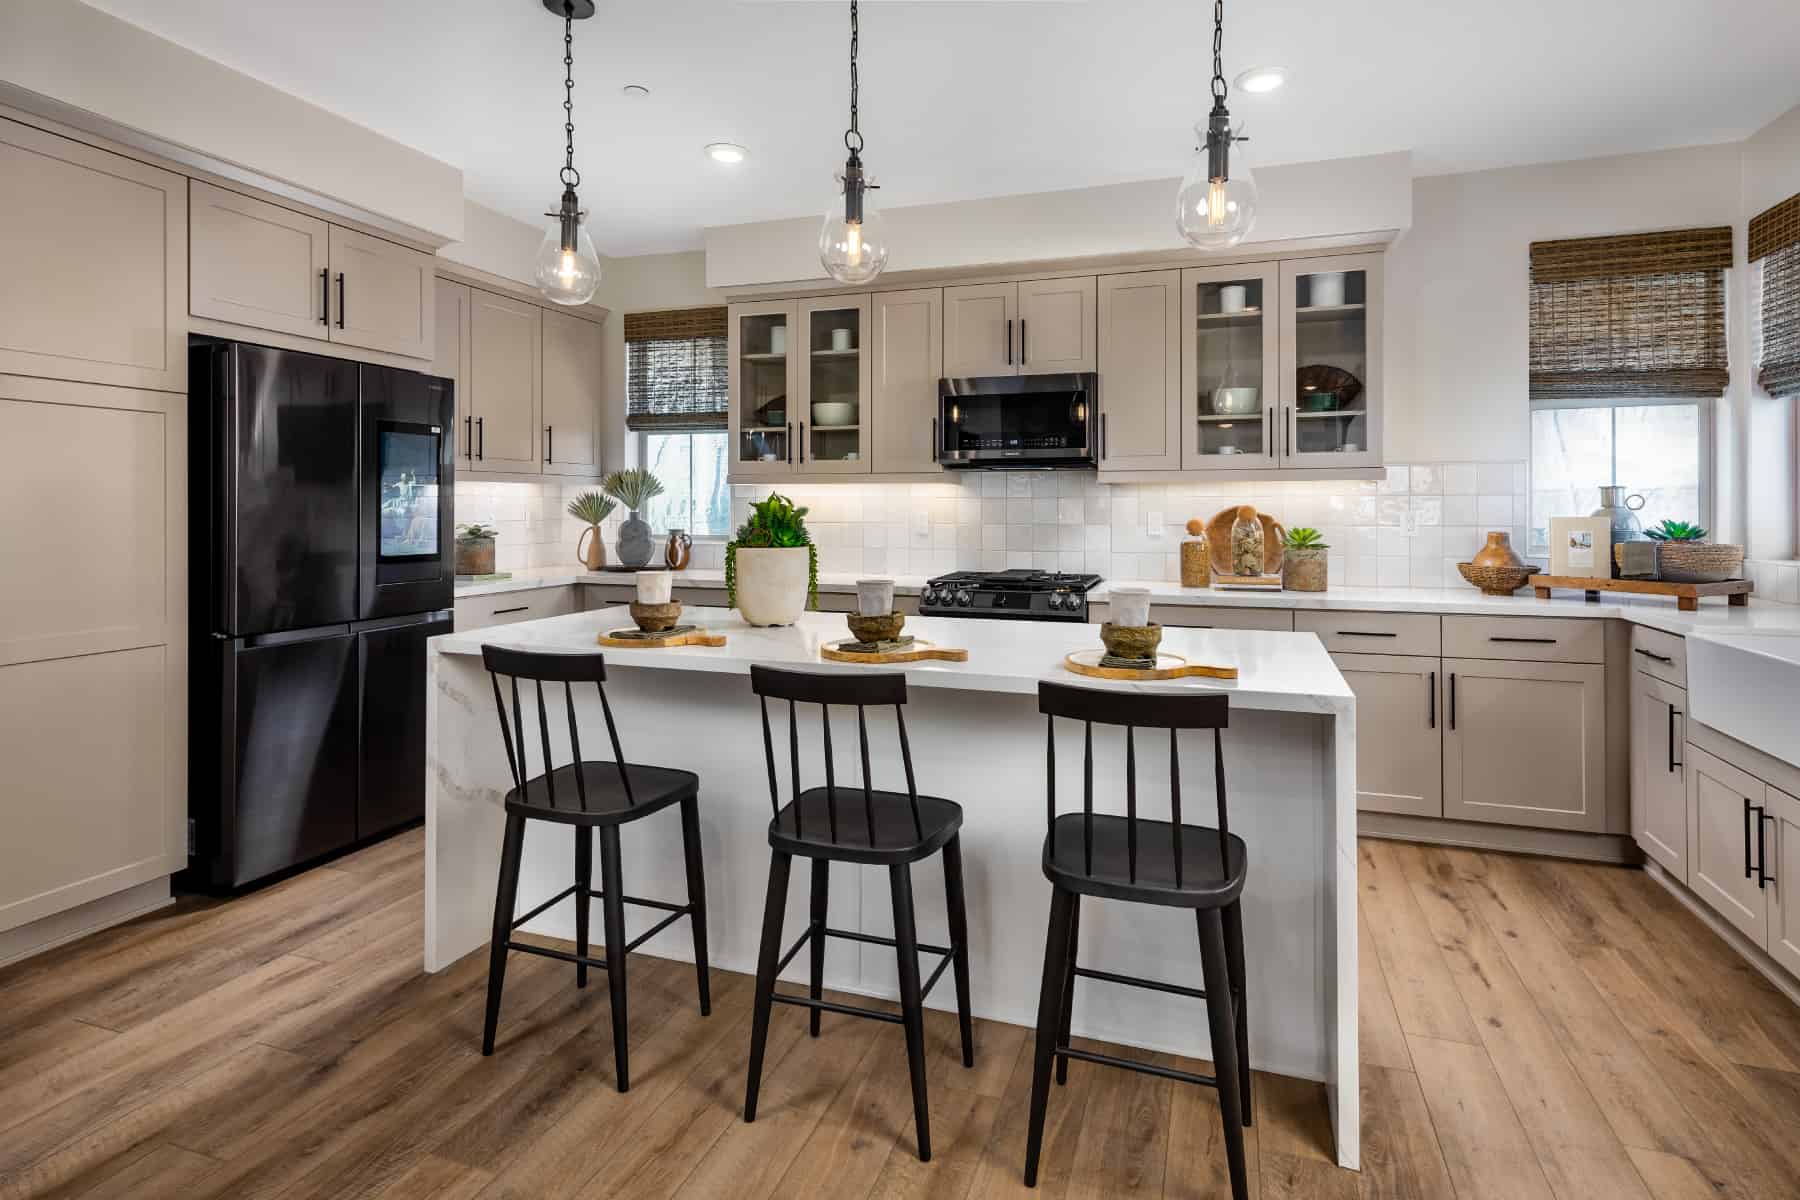 Kitchen at Plan 7 of Belmont by Melia Homes in Cypress, CA